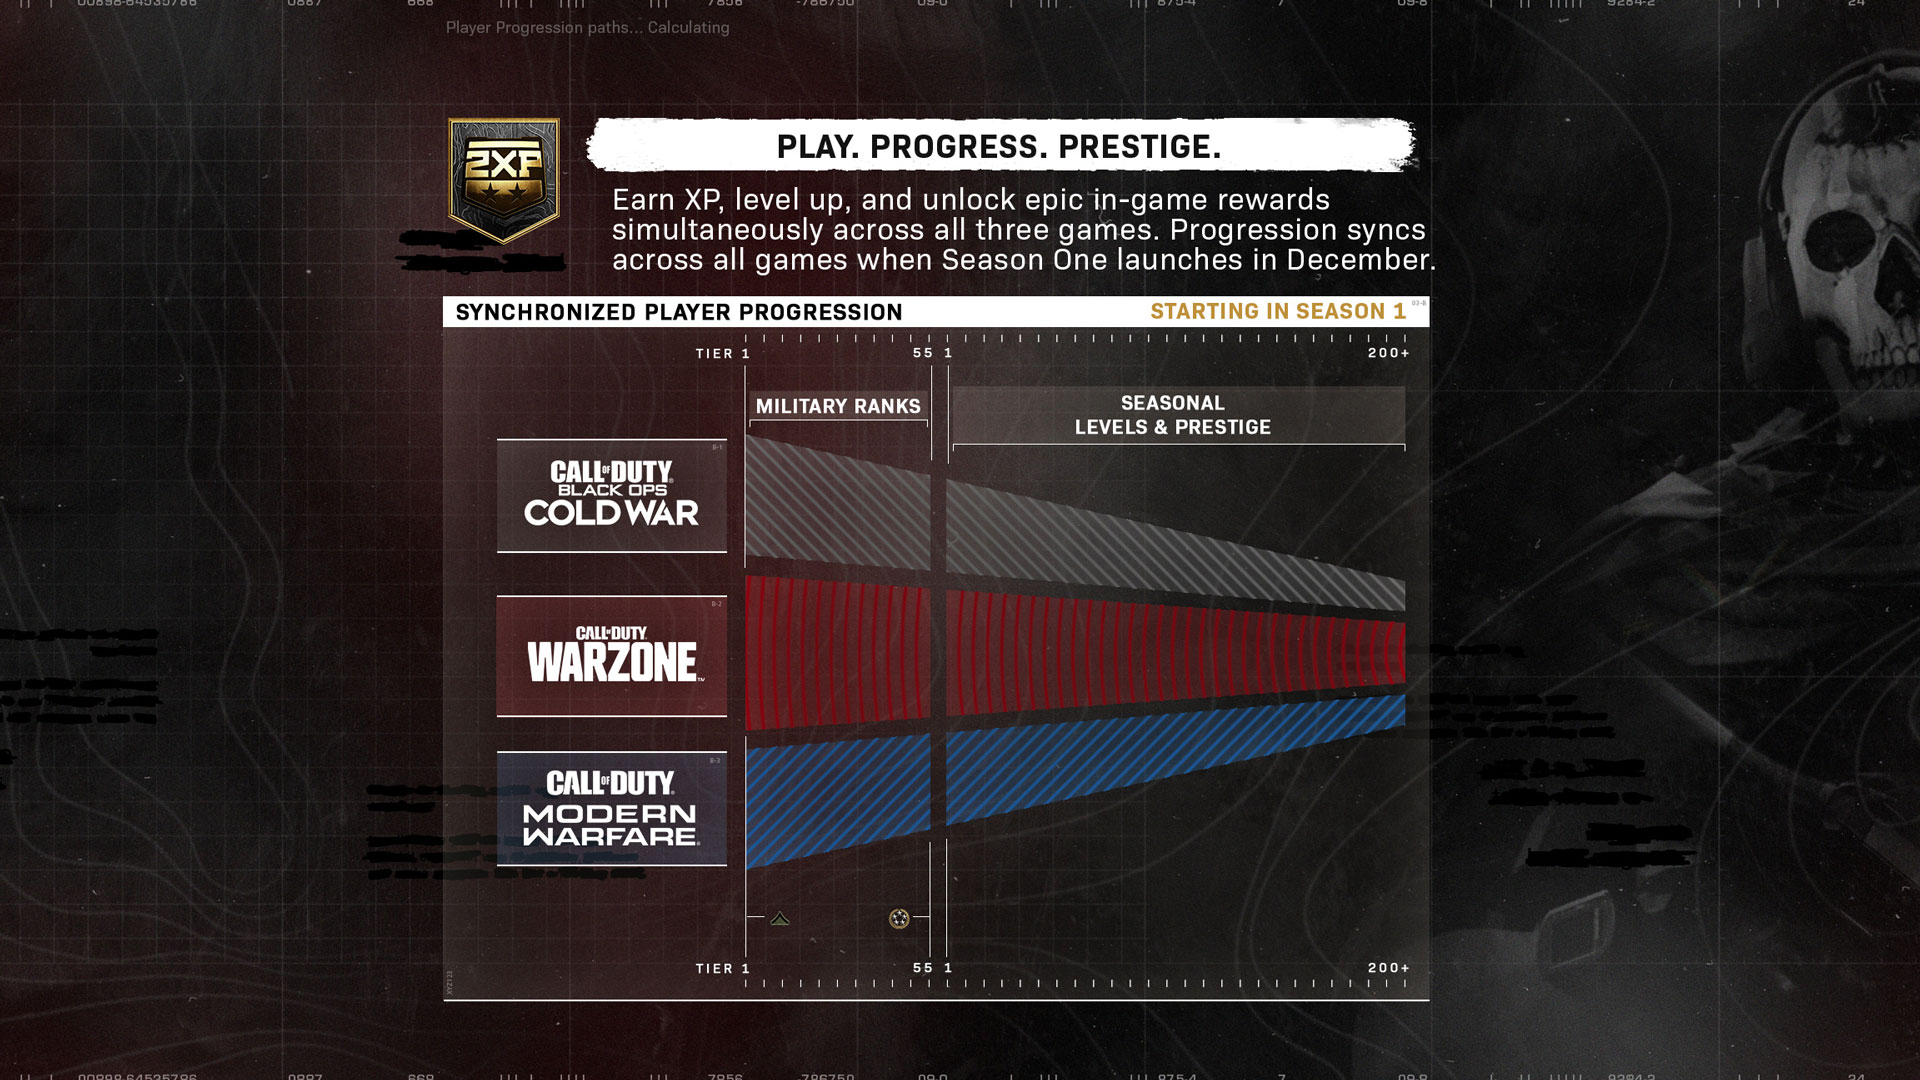 call-of-duty-black-ops-cold-war-warzone-progression-1_0000967492.jpg